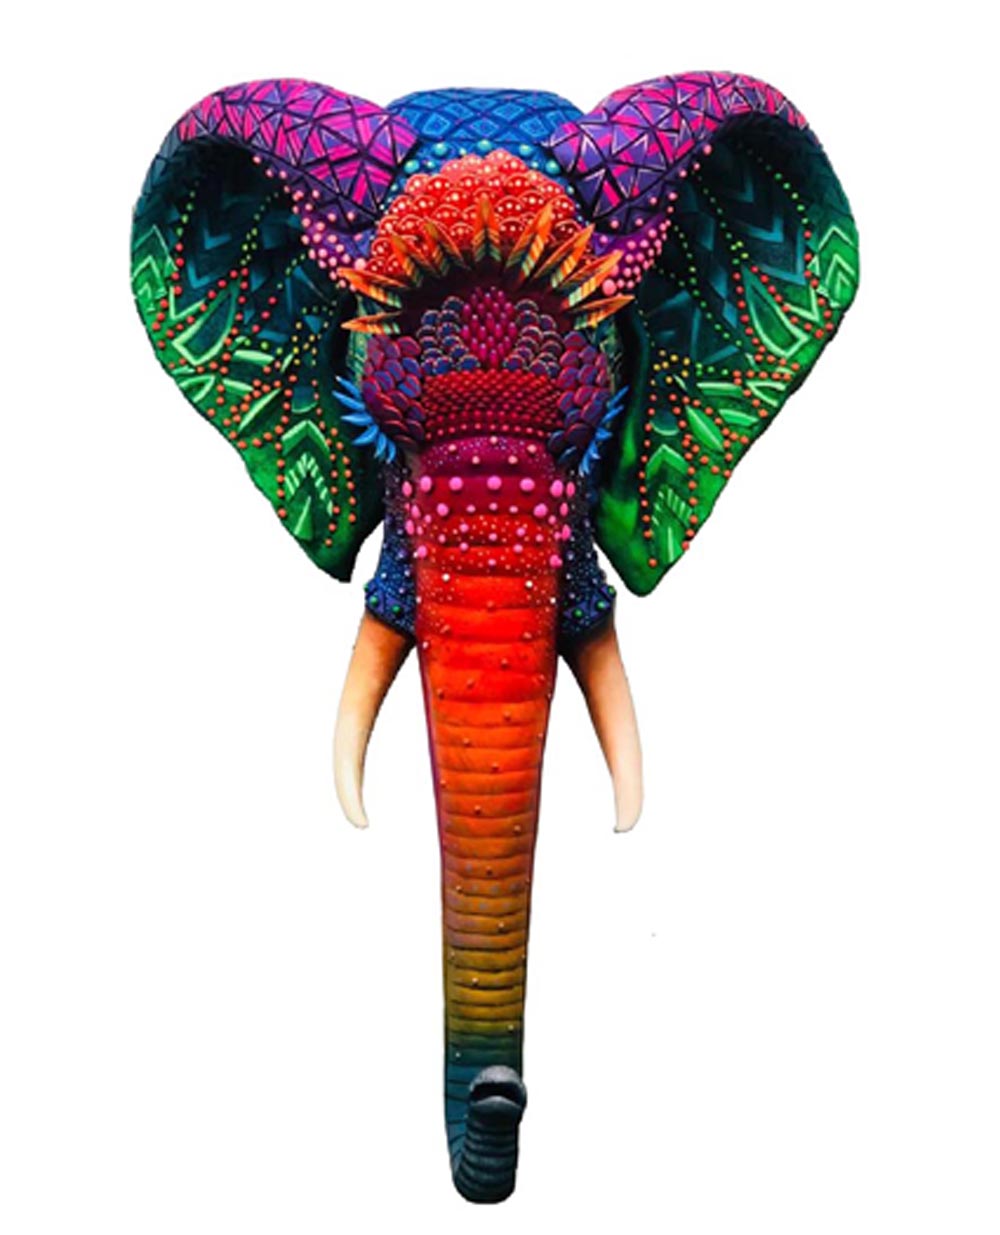 Signed, limited edition elephant sculpture